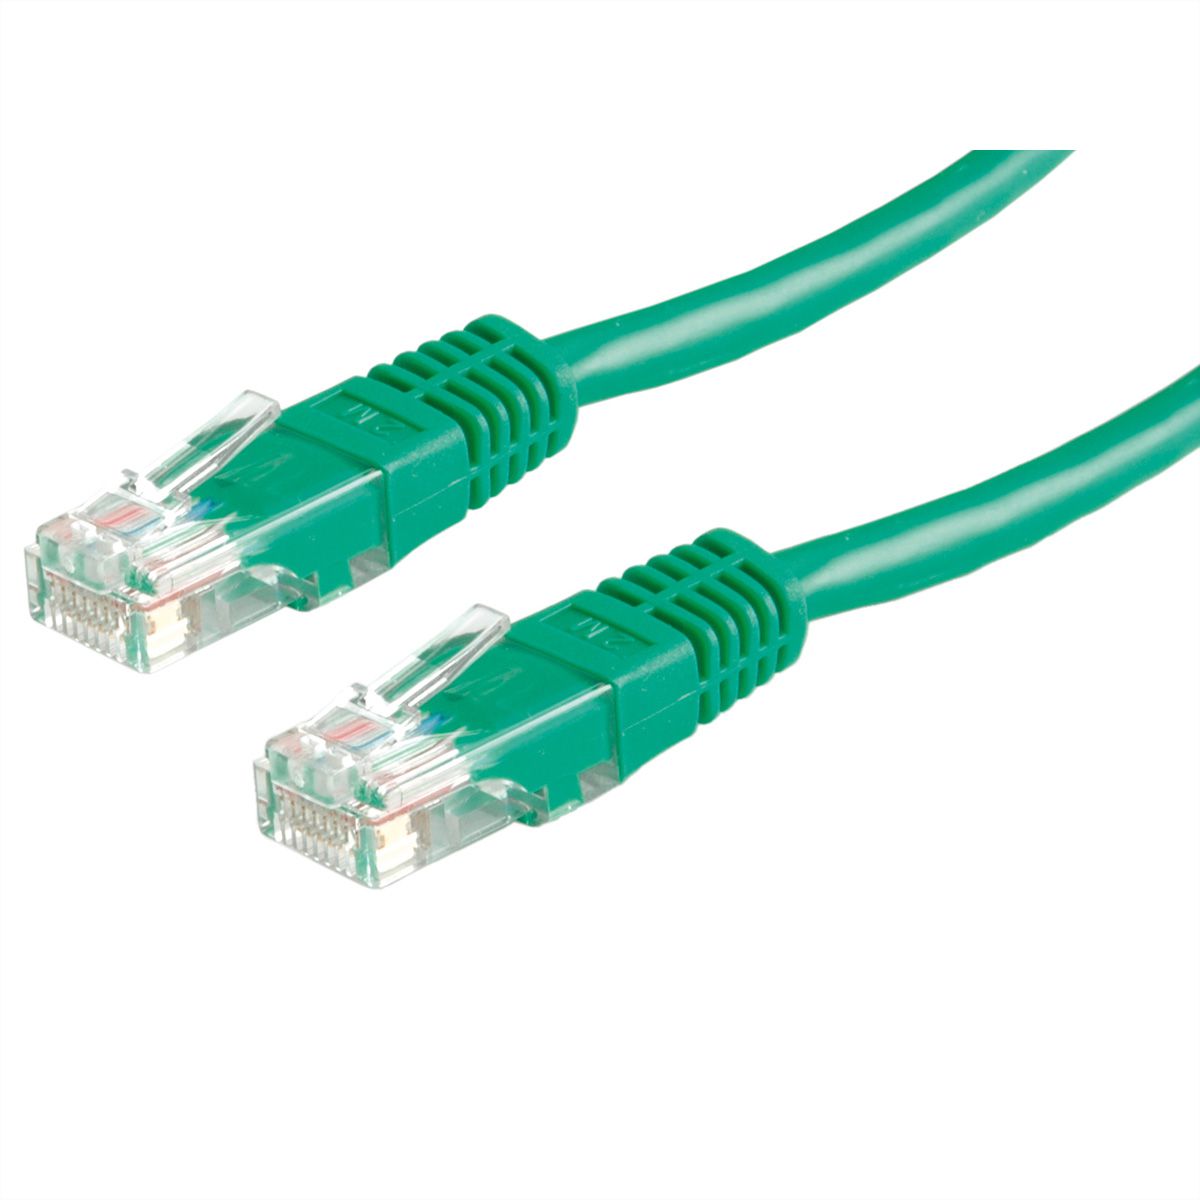 Tecline 71607G Category 5E Copper Patch Cable 2.0 m Green 